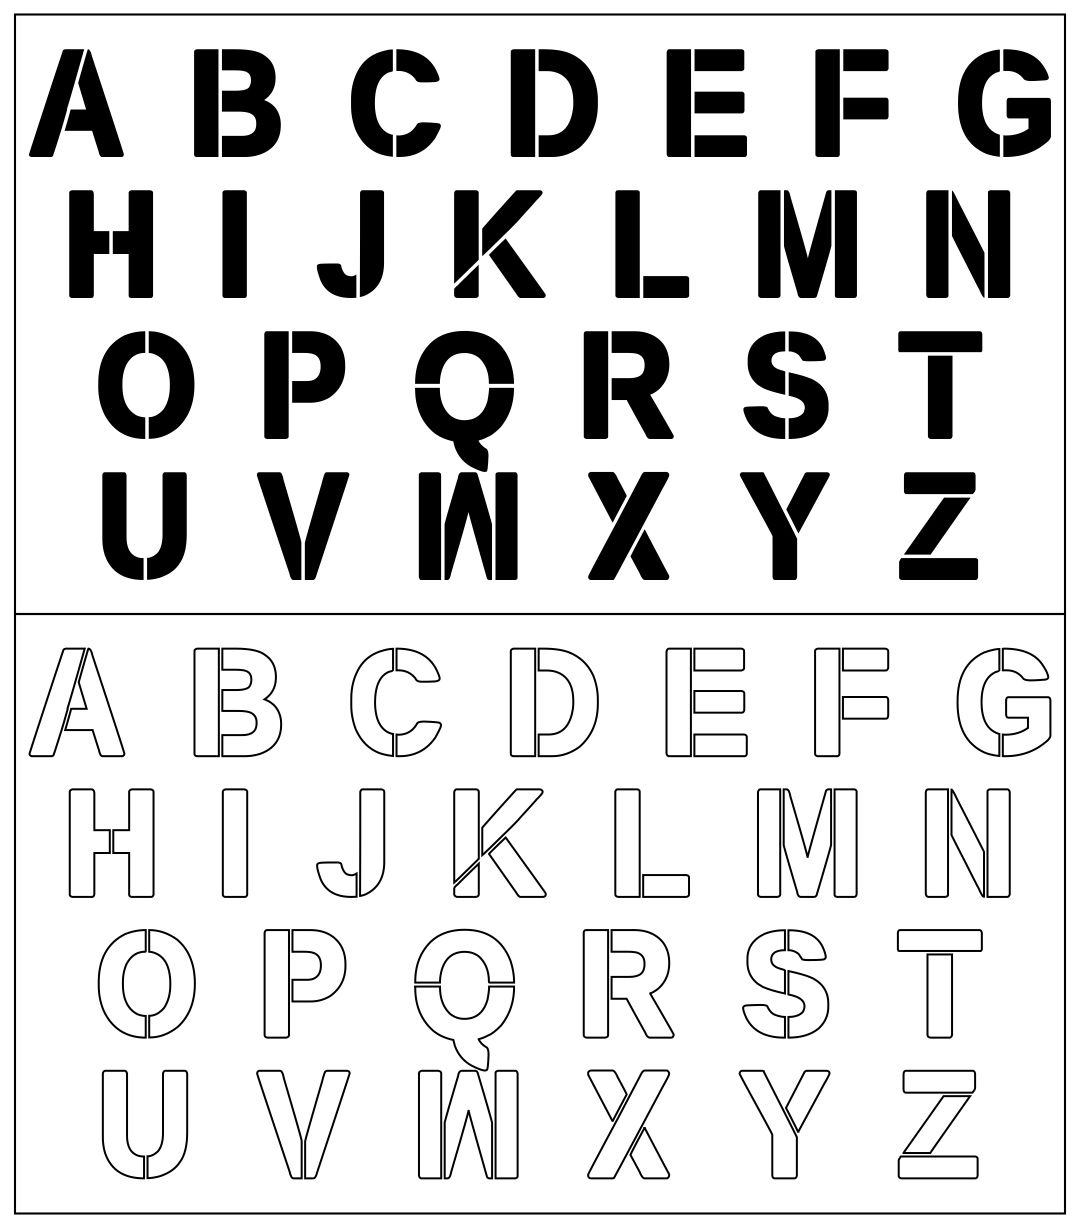 printable-block-letters-large-abc-tracing-worksheets